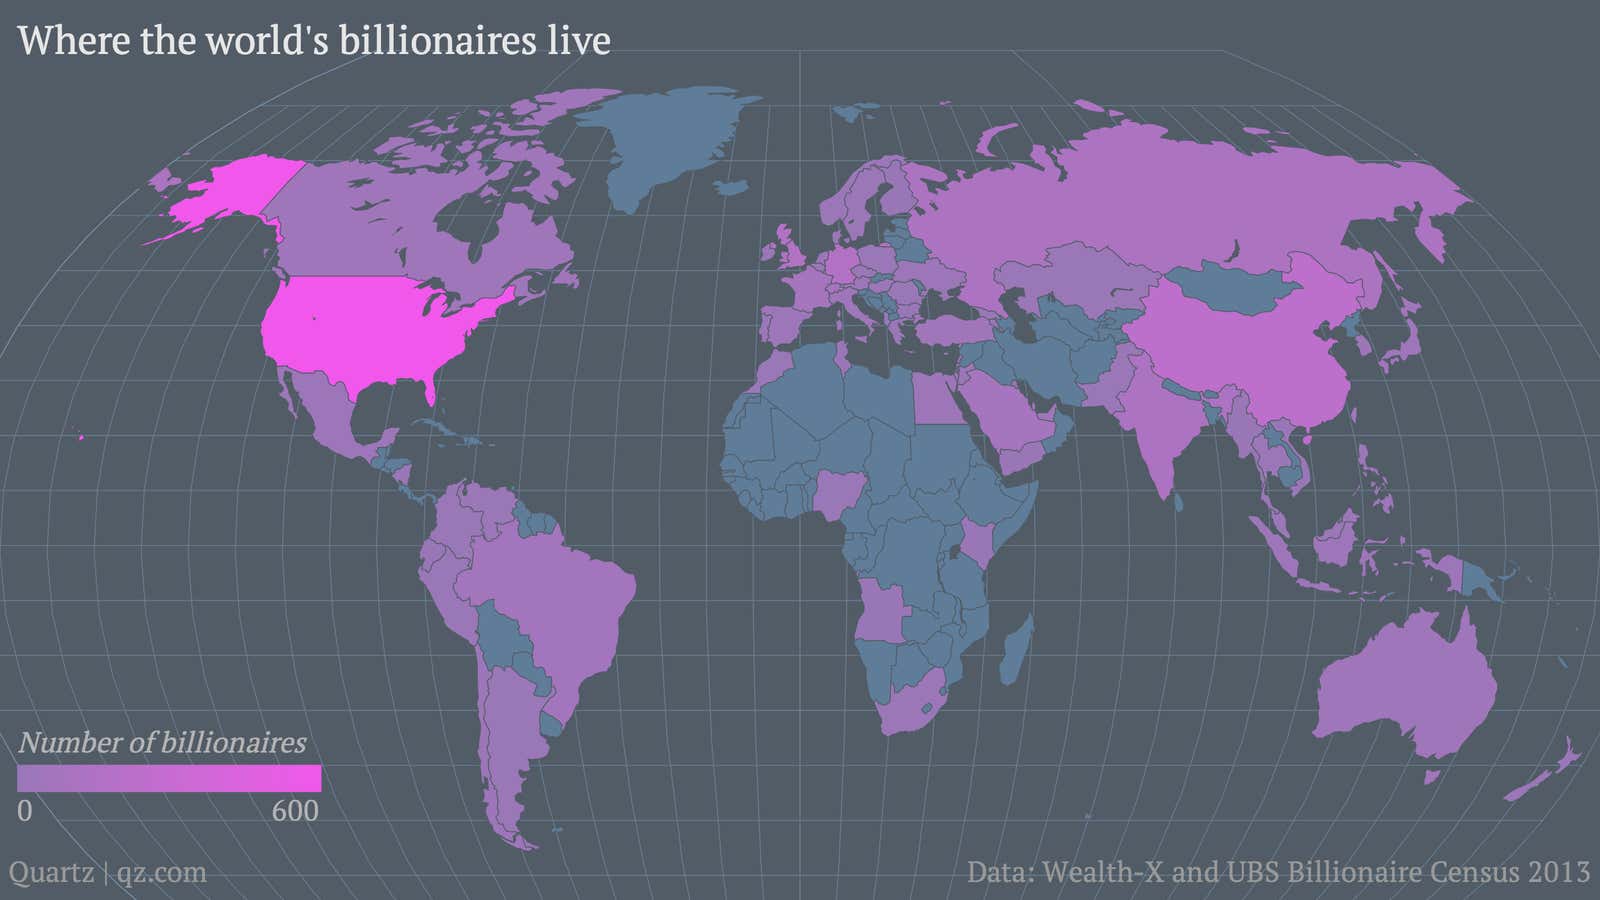 More billionaires live in Beijing than in Los Angeles. Next year, that may change.